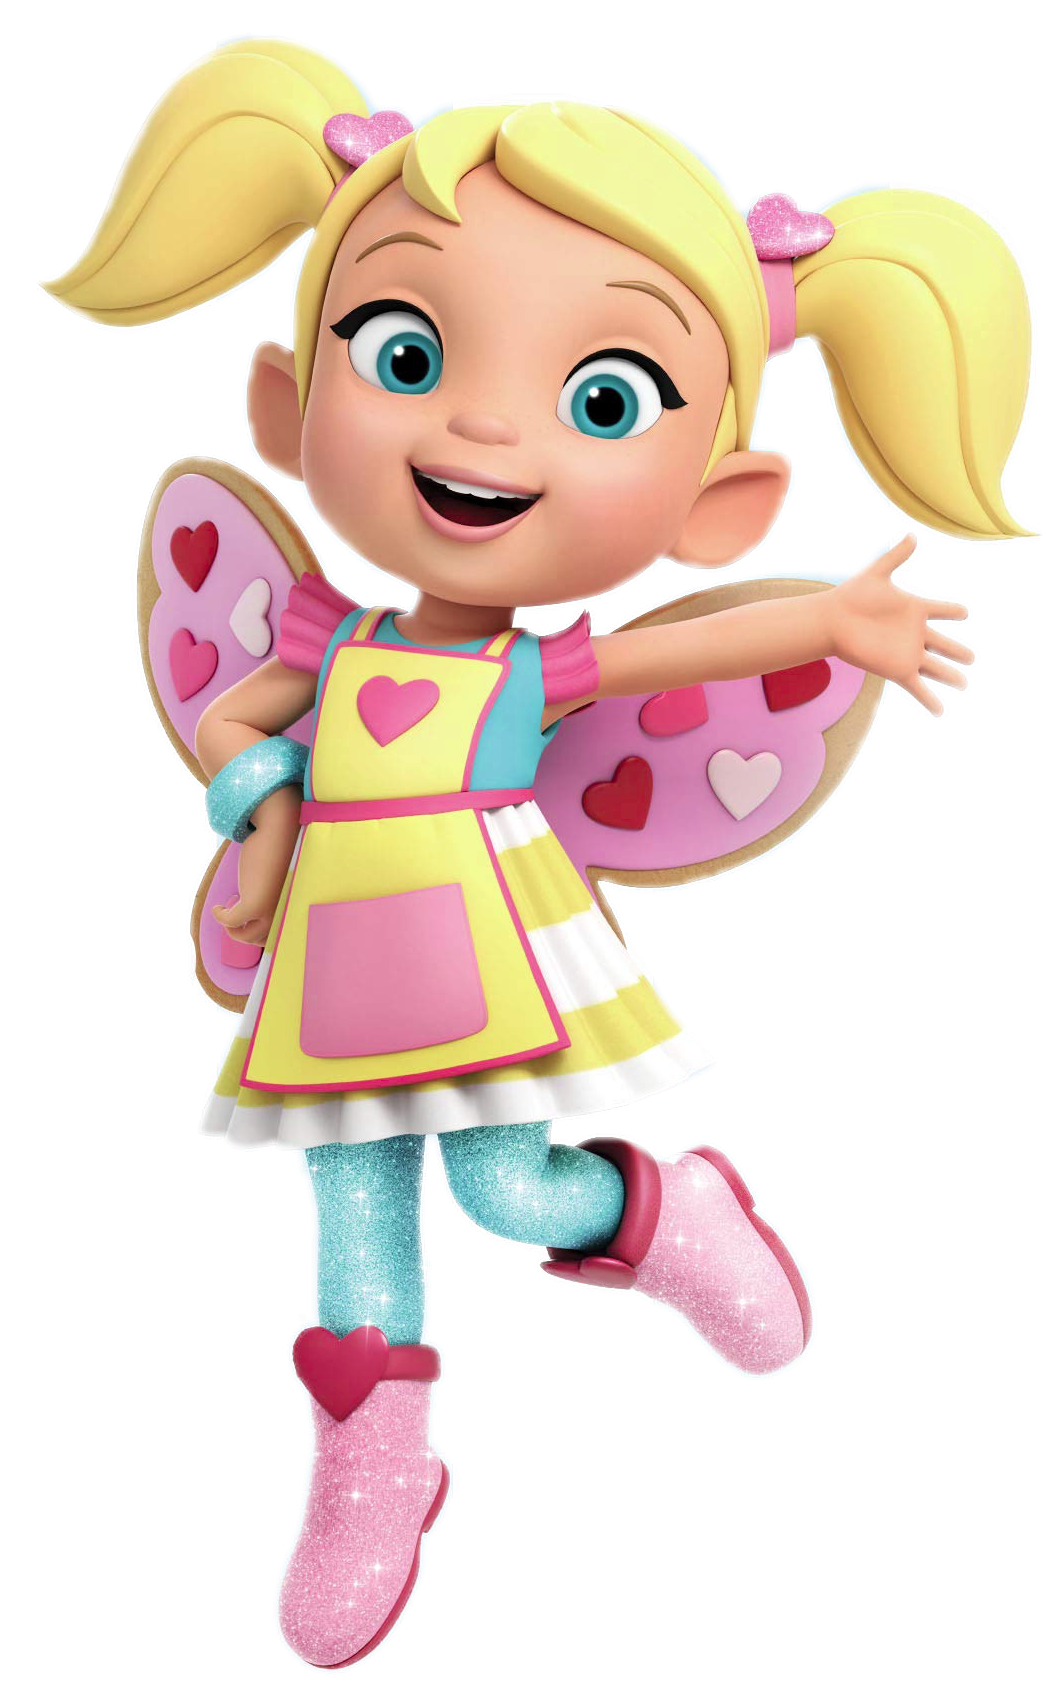 We have found a great Butterbeans Café Character Cricket waving PNG image for you. Check it o. Kids cartoon characters, Cute cartoon wallpaper, Butterbean's cafe